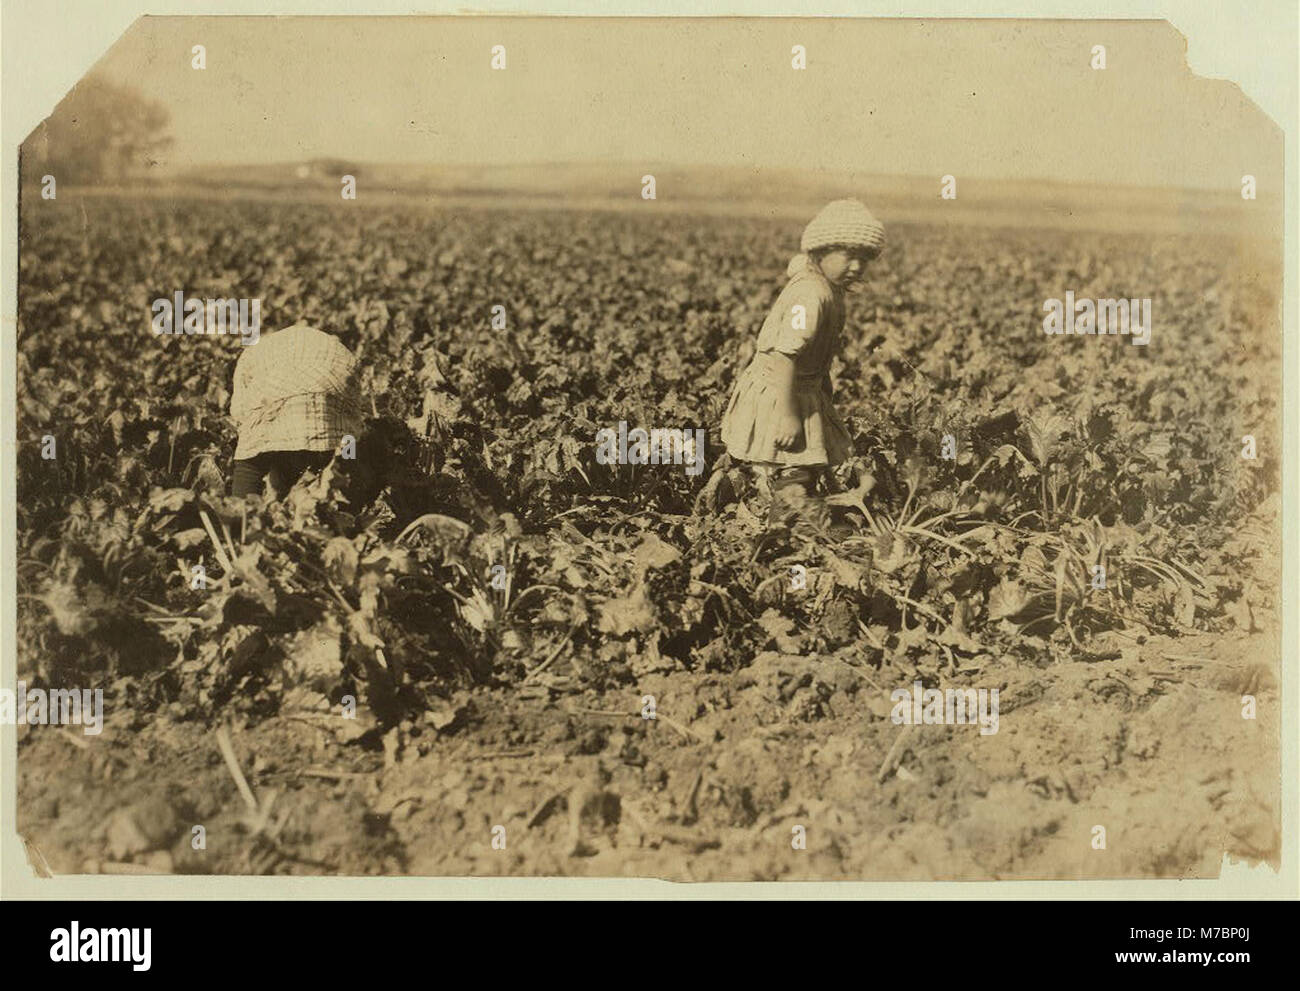 Conrad Helmut's two girls, 6 and 8 yrs. old, pulling beets, near Sterling, Colo. The ground was hard and the little ones tugged away at the beets steadily. There are three smaller children LOC nclc.00323 Stock Photo